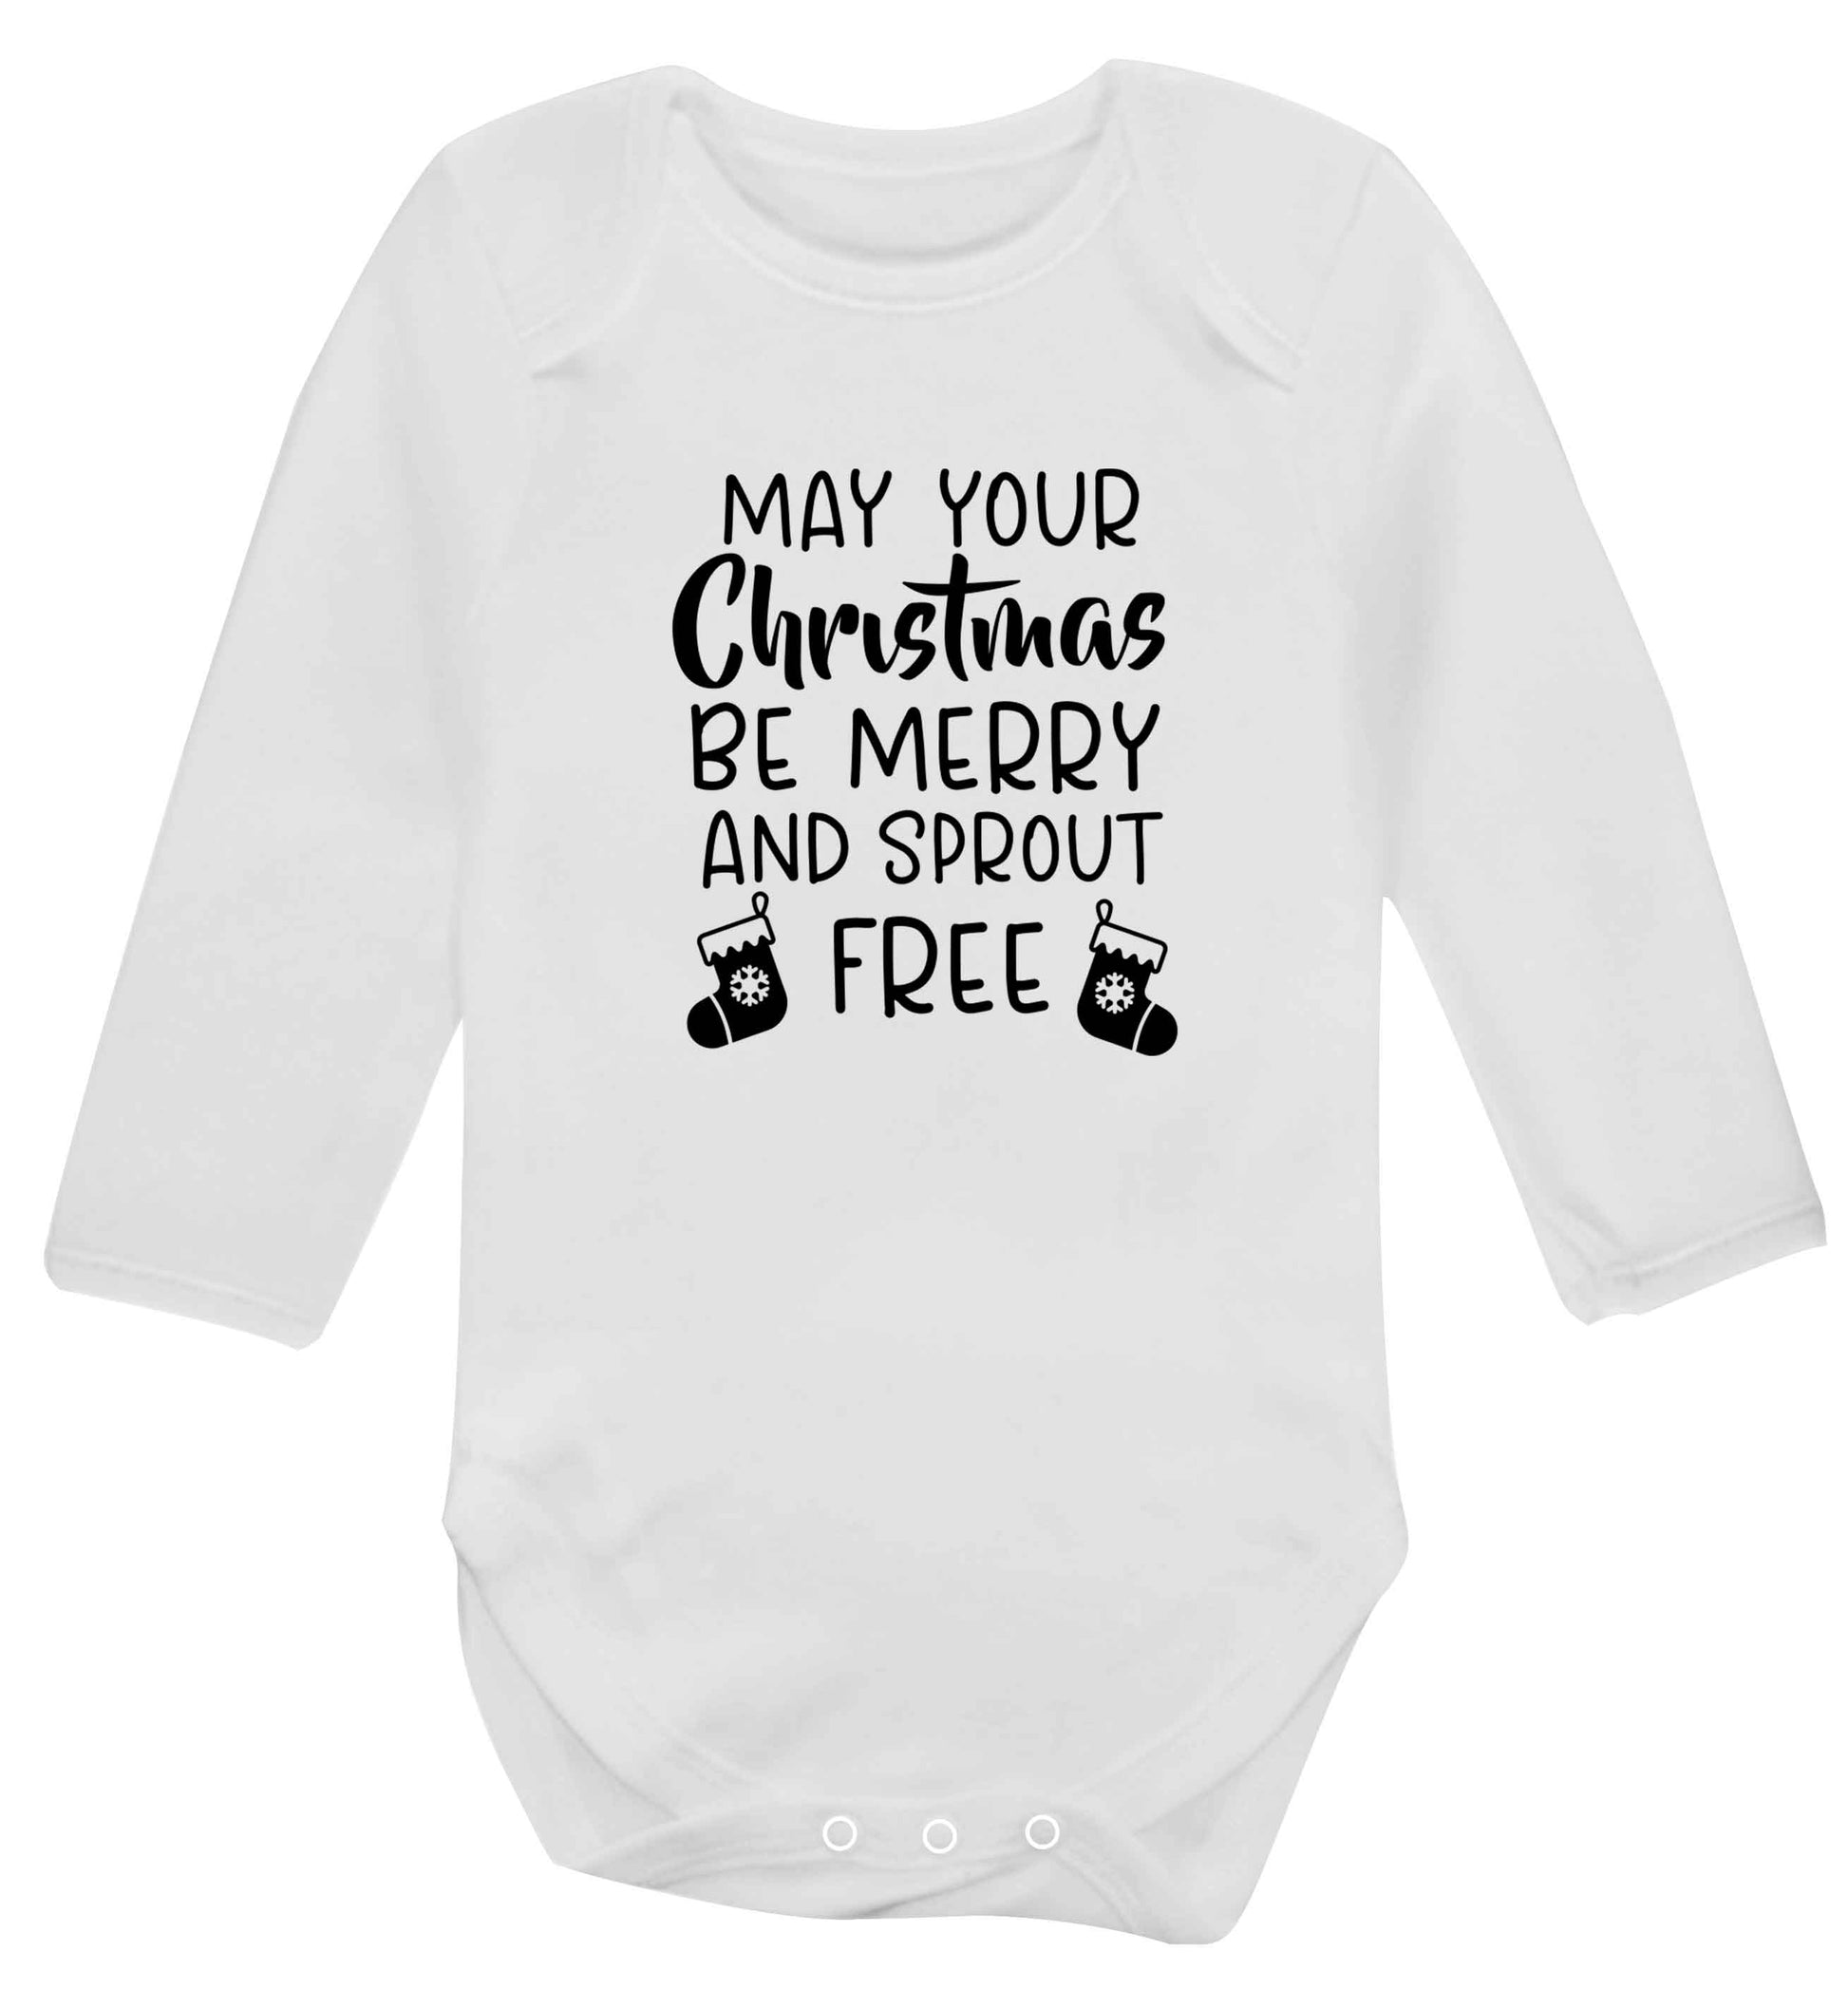 May your Christmas be merry and sprout free baby vest long sleeved white 6-12 months